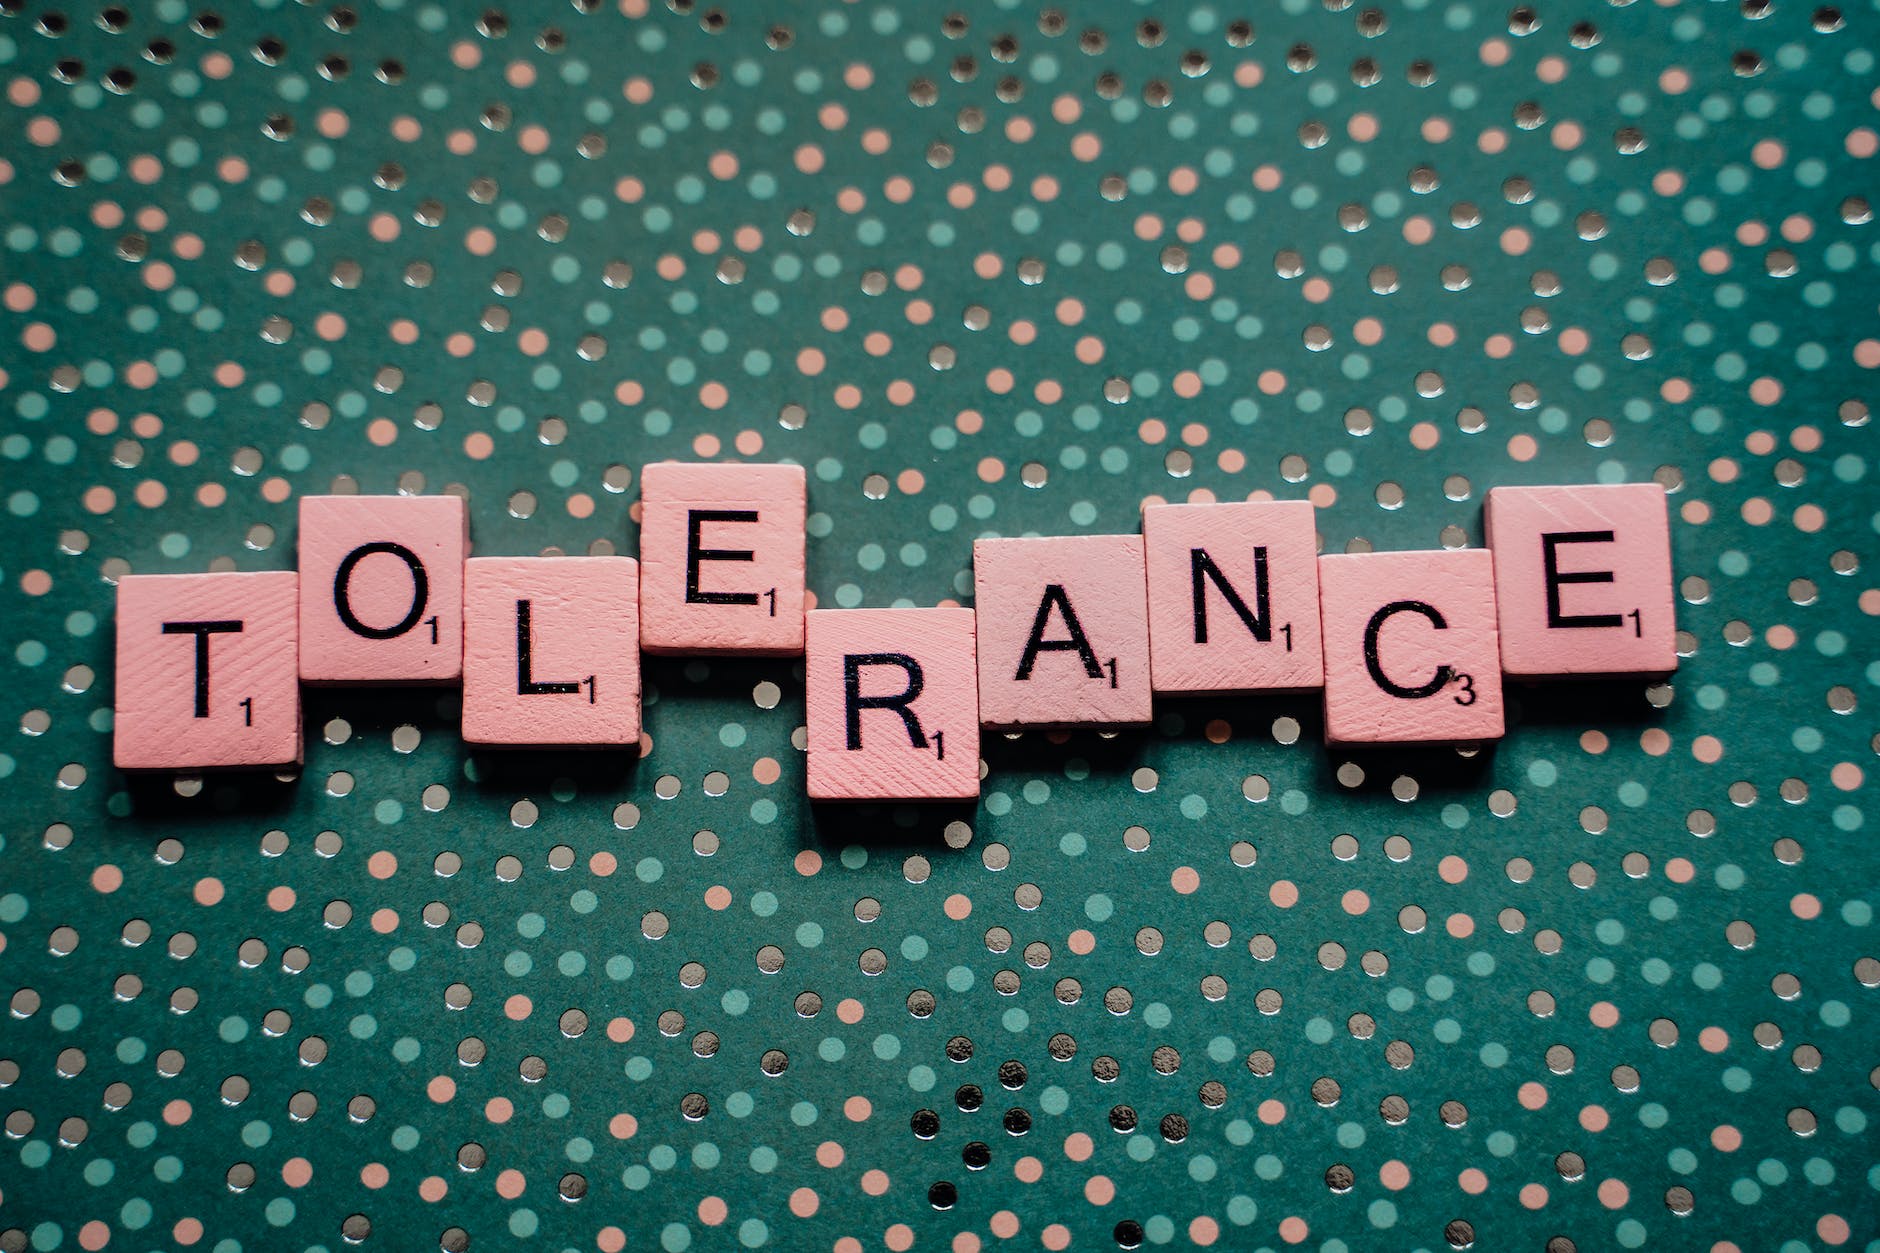 scrabble tiles spelling out the word tolerance